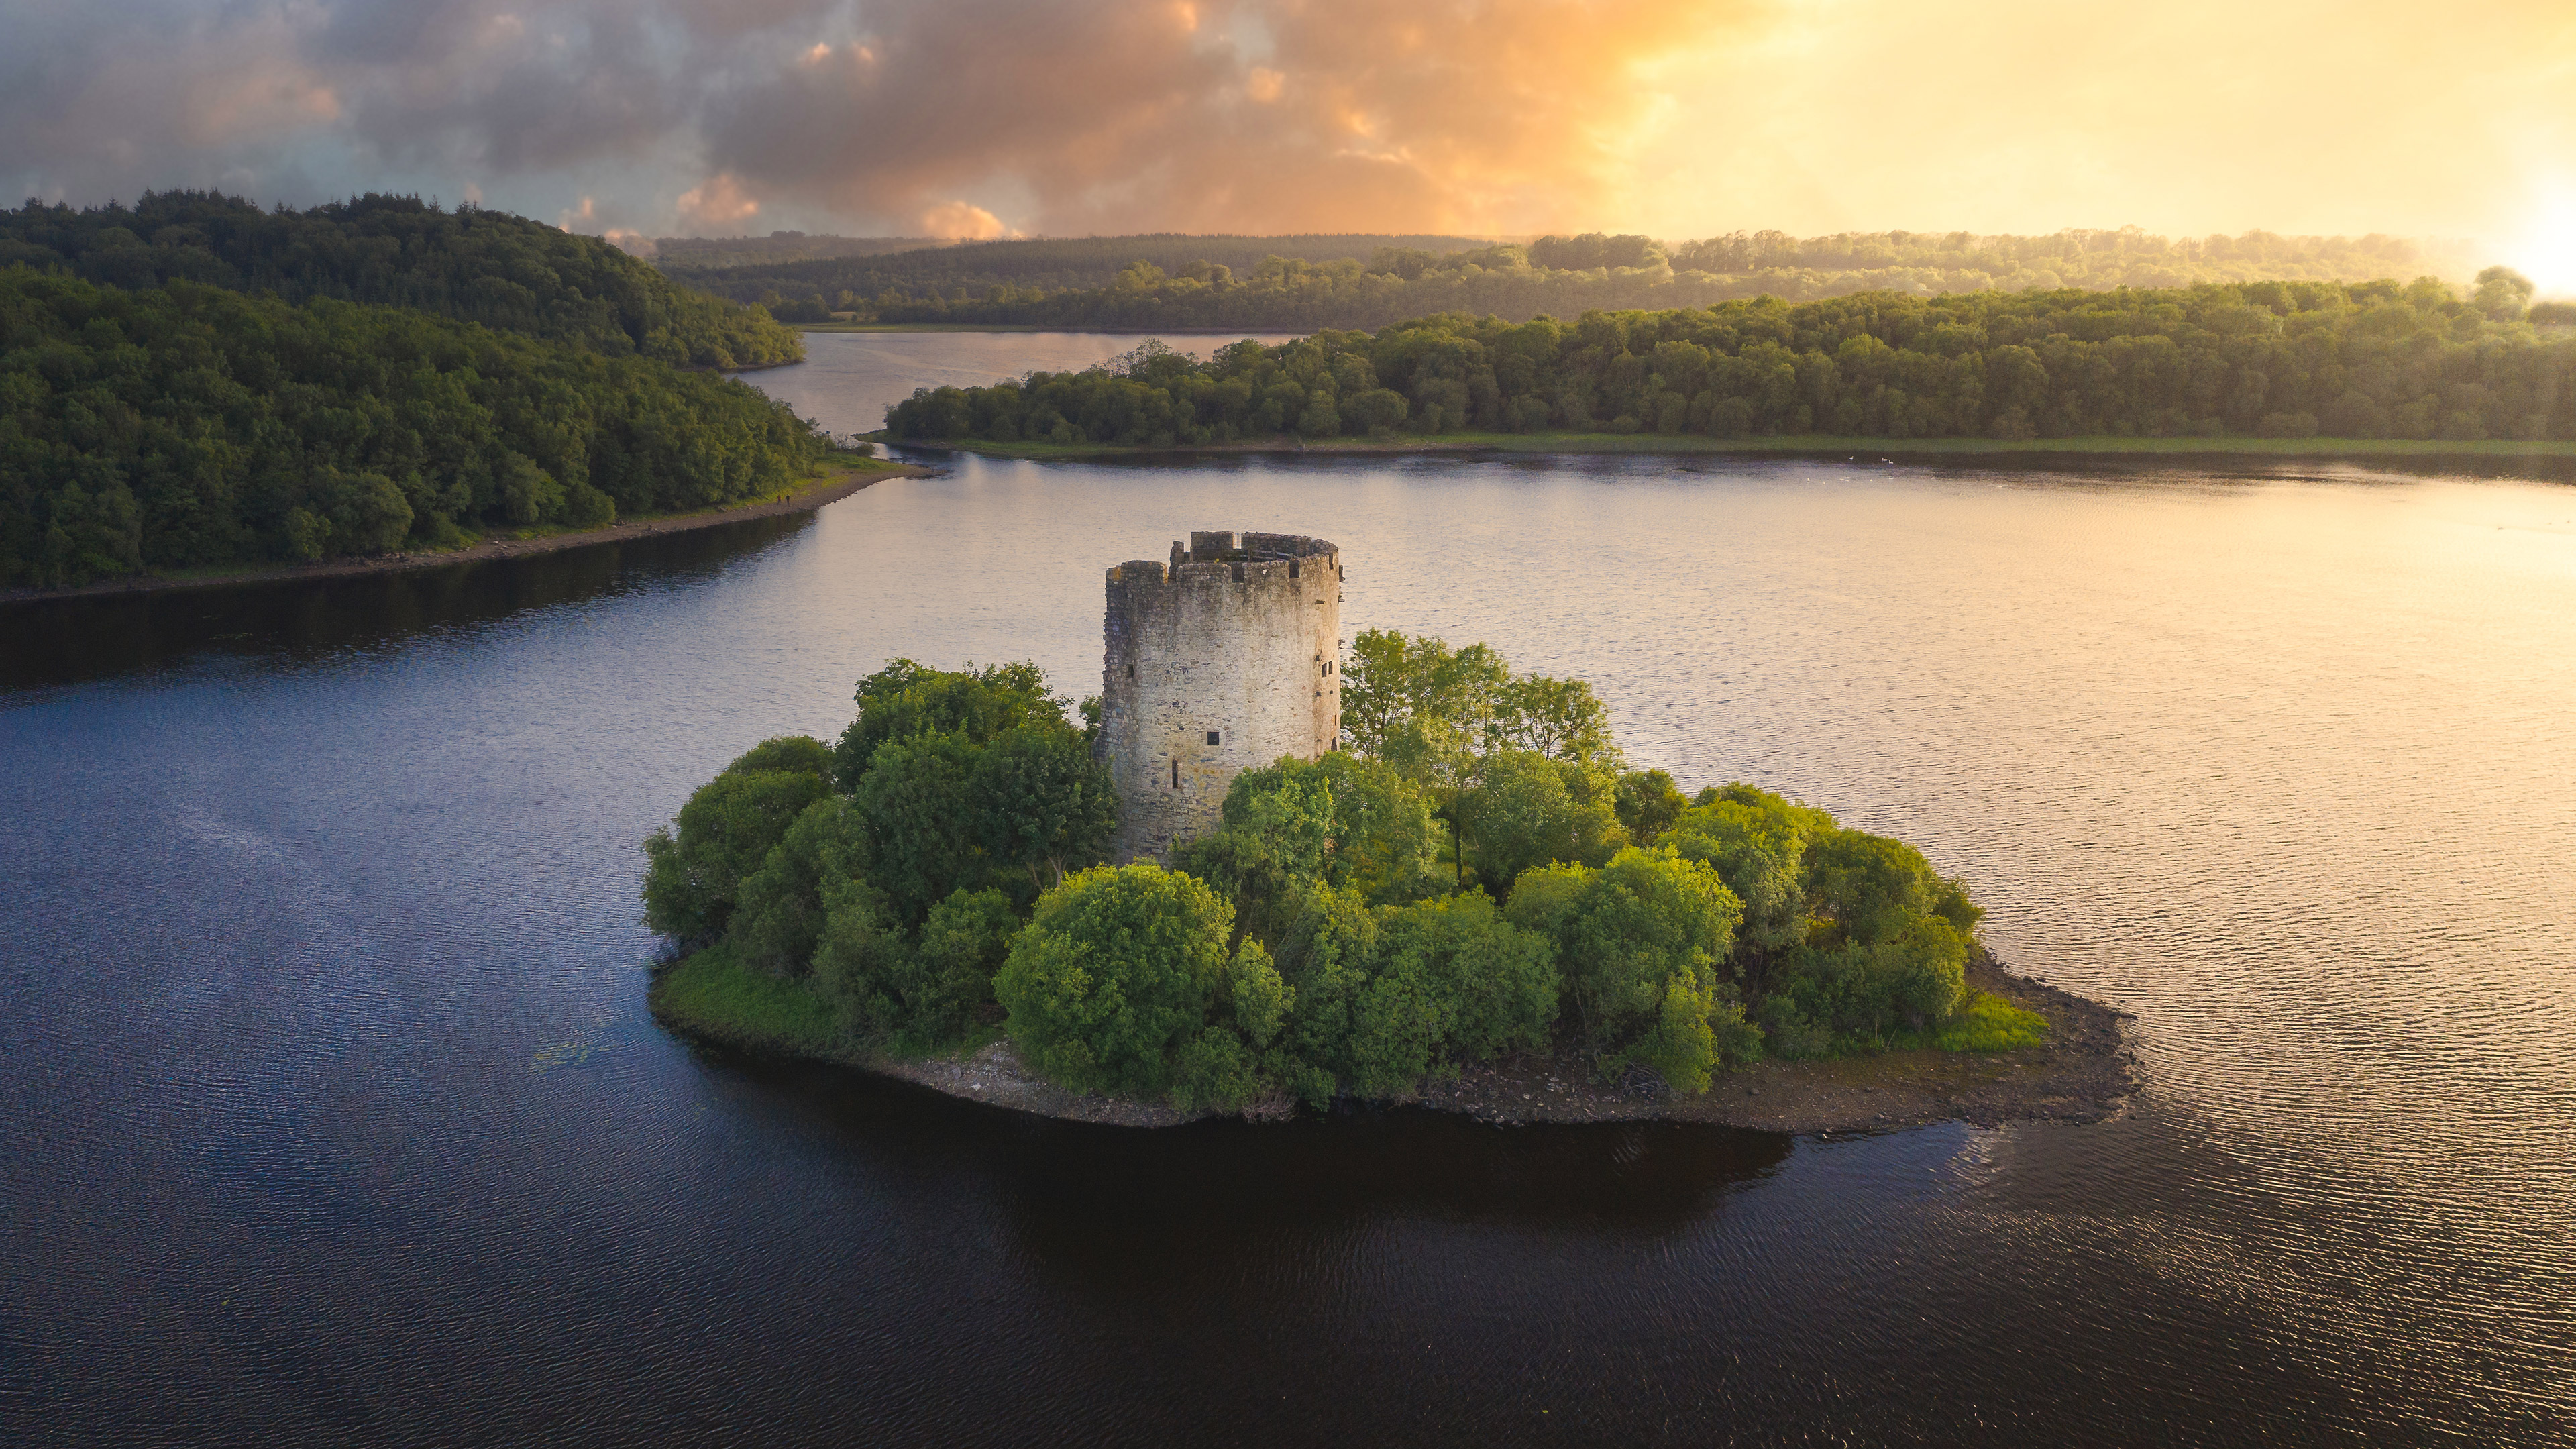 General 3840x2160 Cloughoughter Castle lake Ireland island sky nature forest water trees clouds sunset castle sunset glow